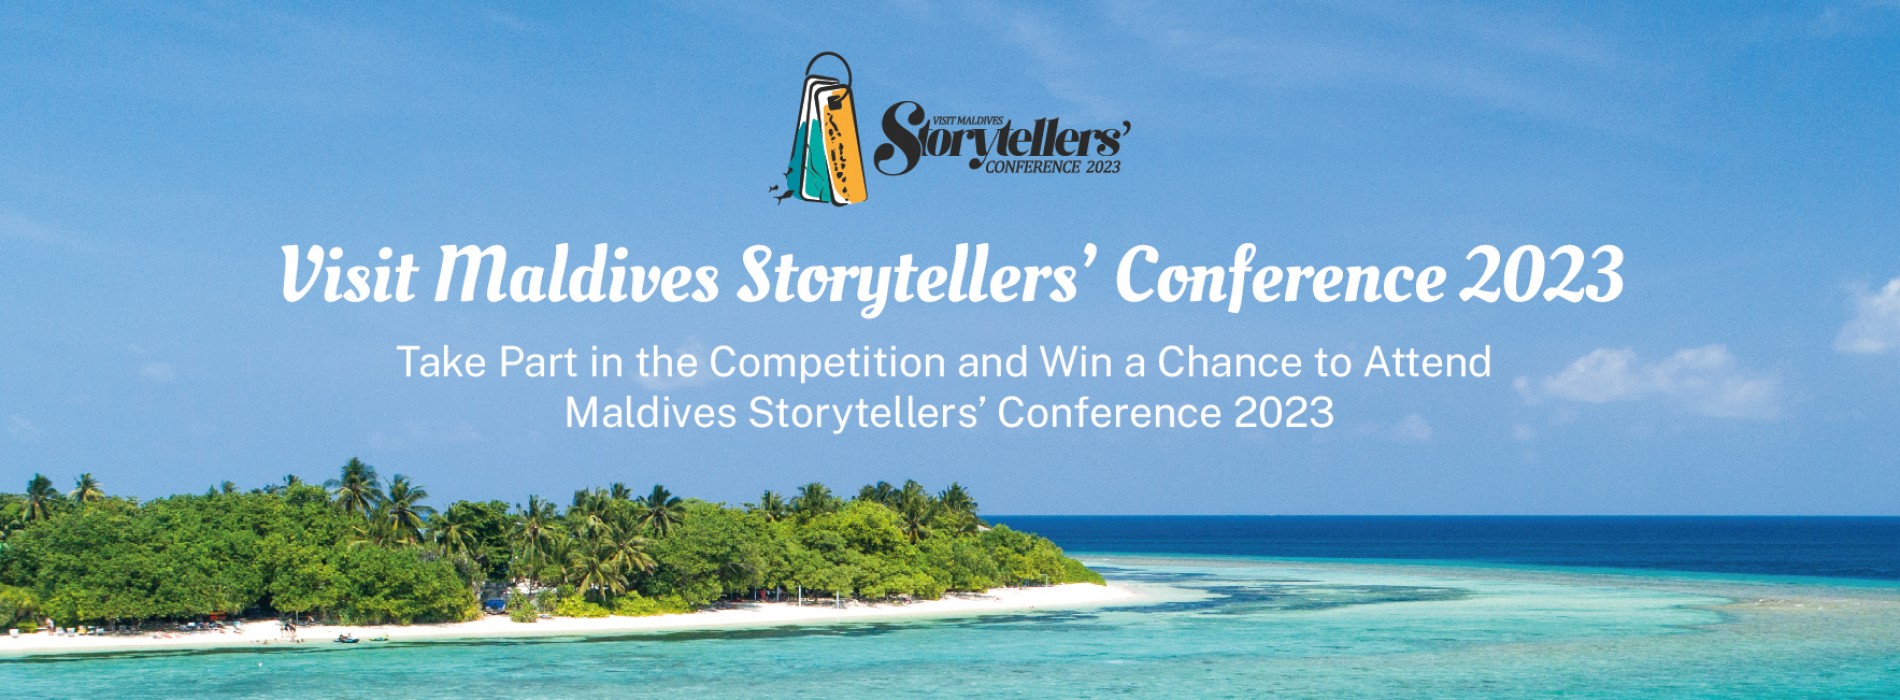 Visit Maldives Storytellers’ Conference 2023 Social Media Competition kicks off with 50+ Free Trips to the Maldives